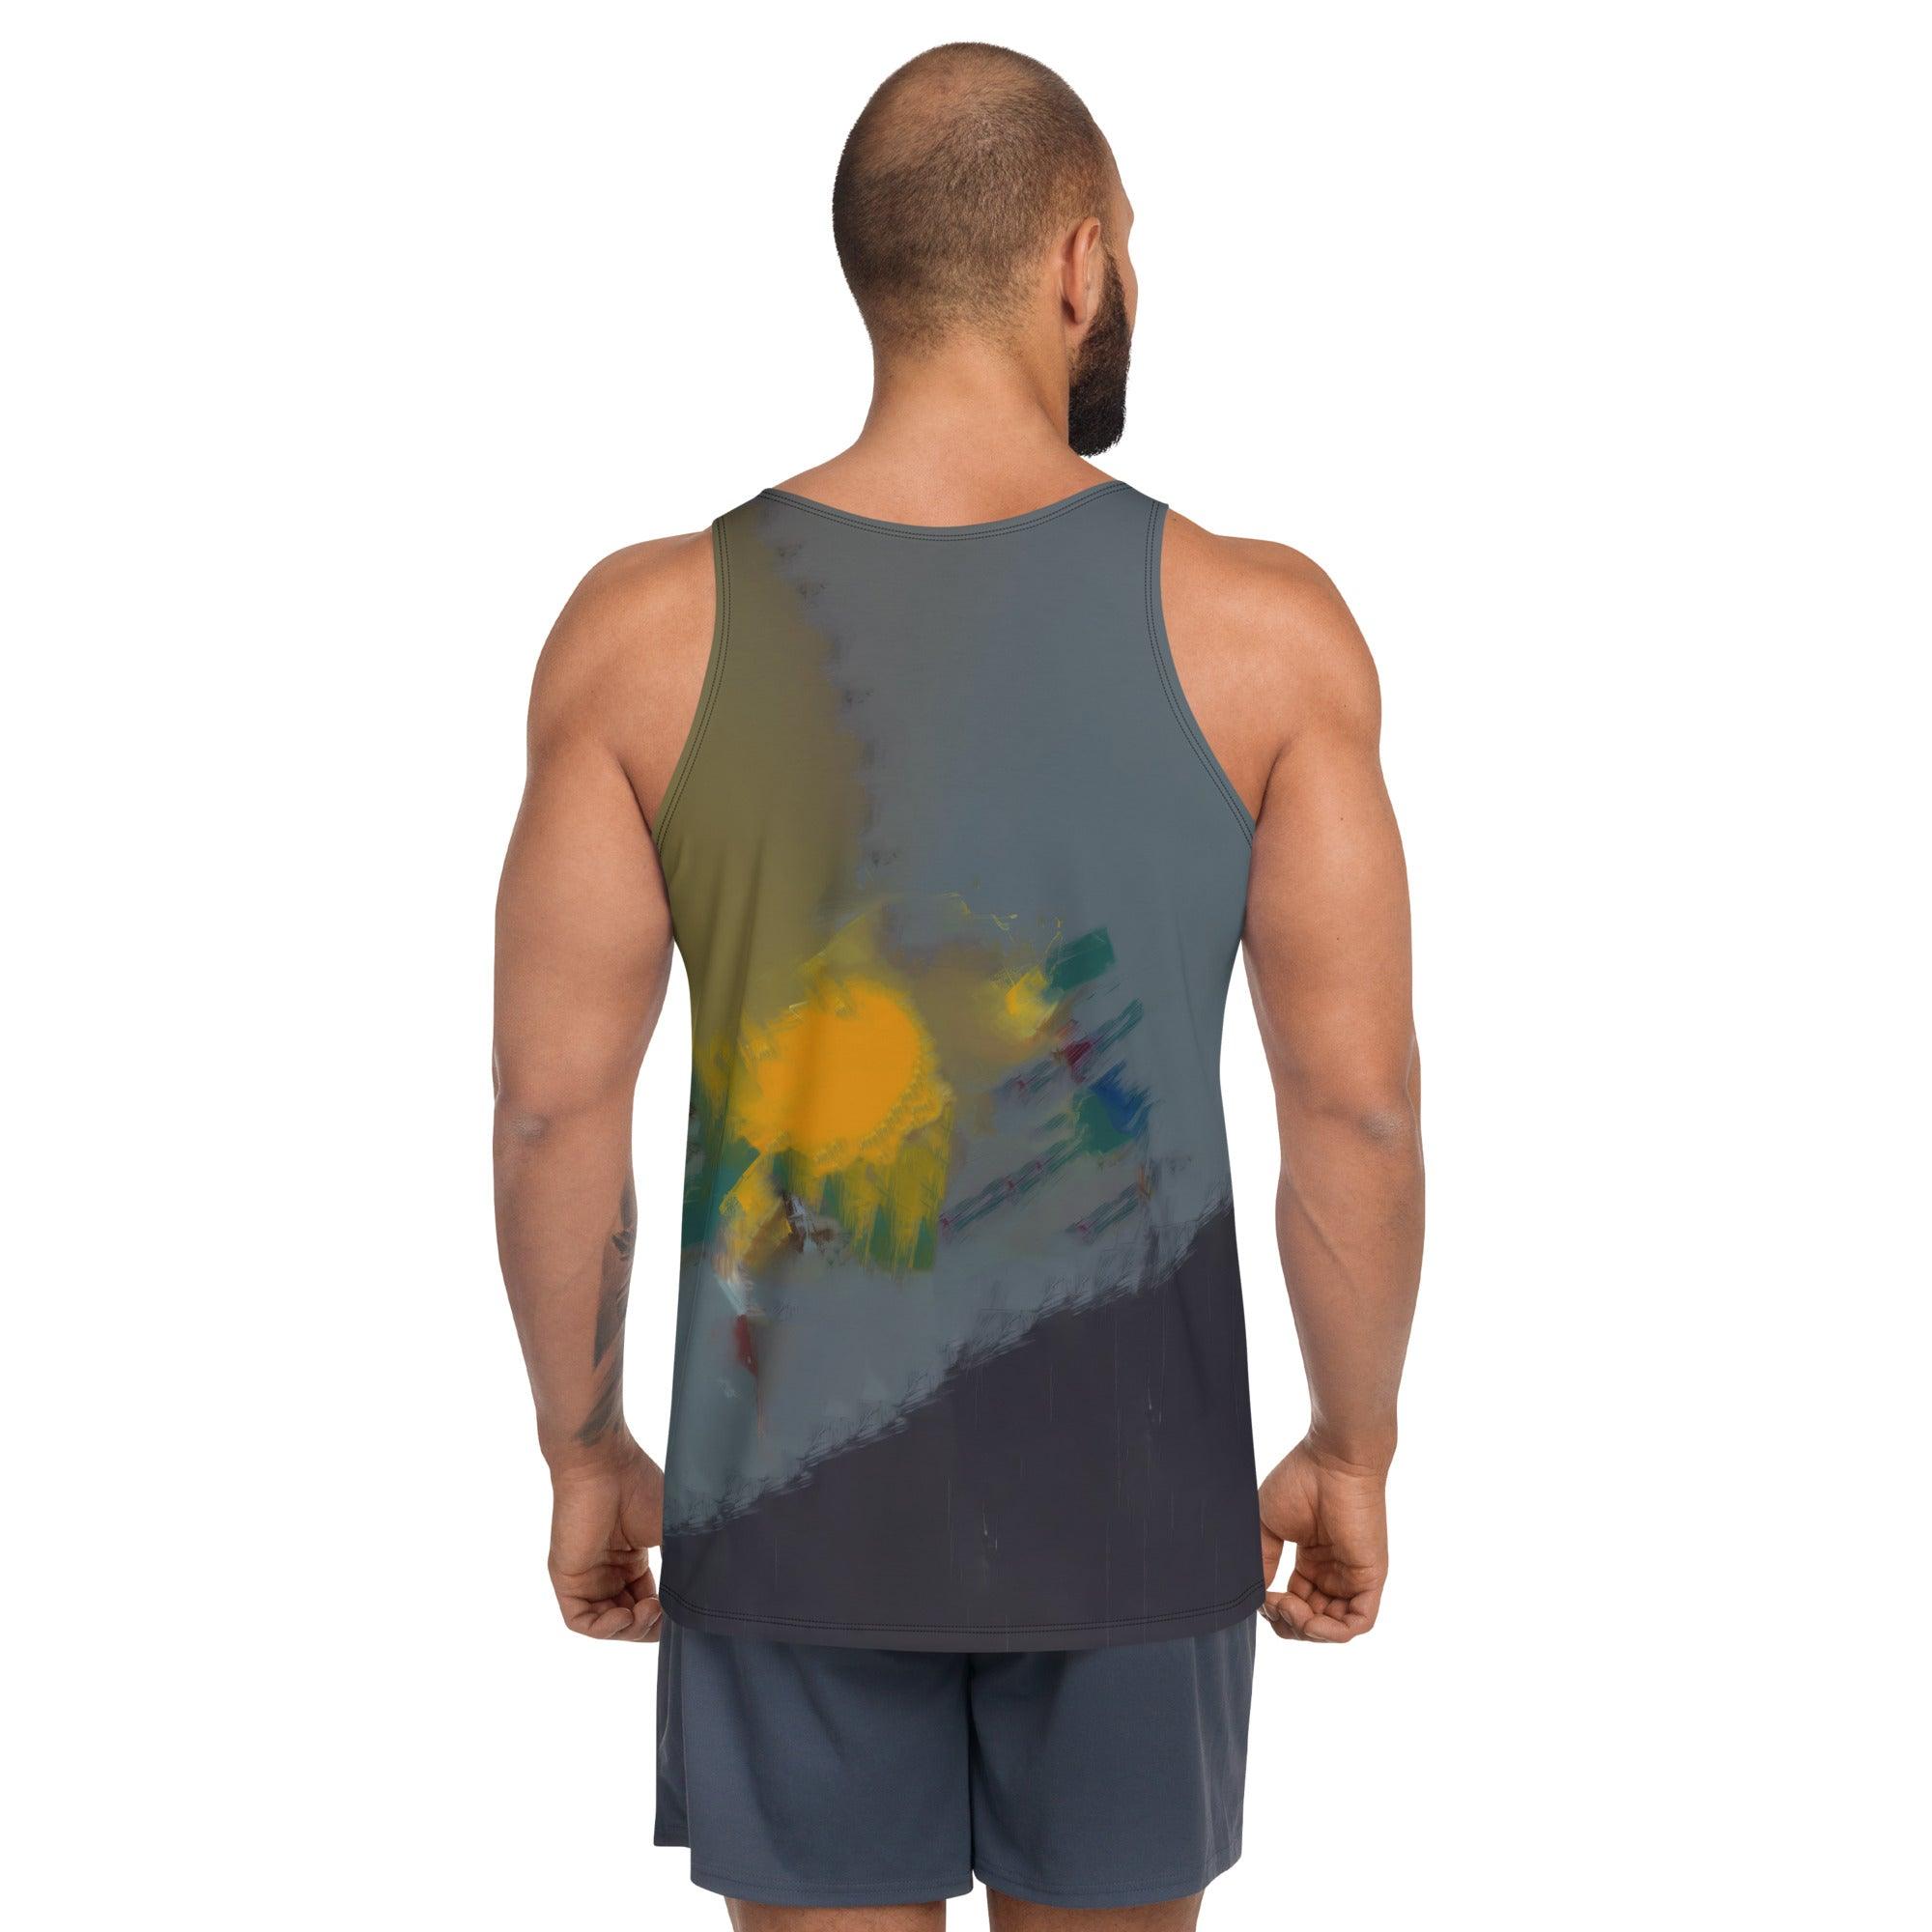 Back view of Sound Sanctuary Men's Tank Top, highlighting the sleek and breathable design.